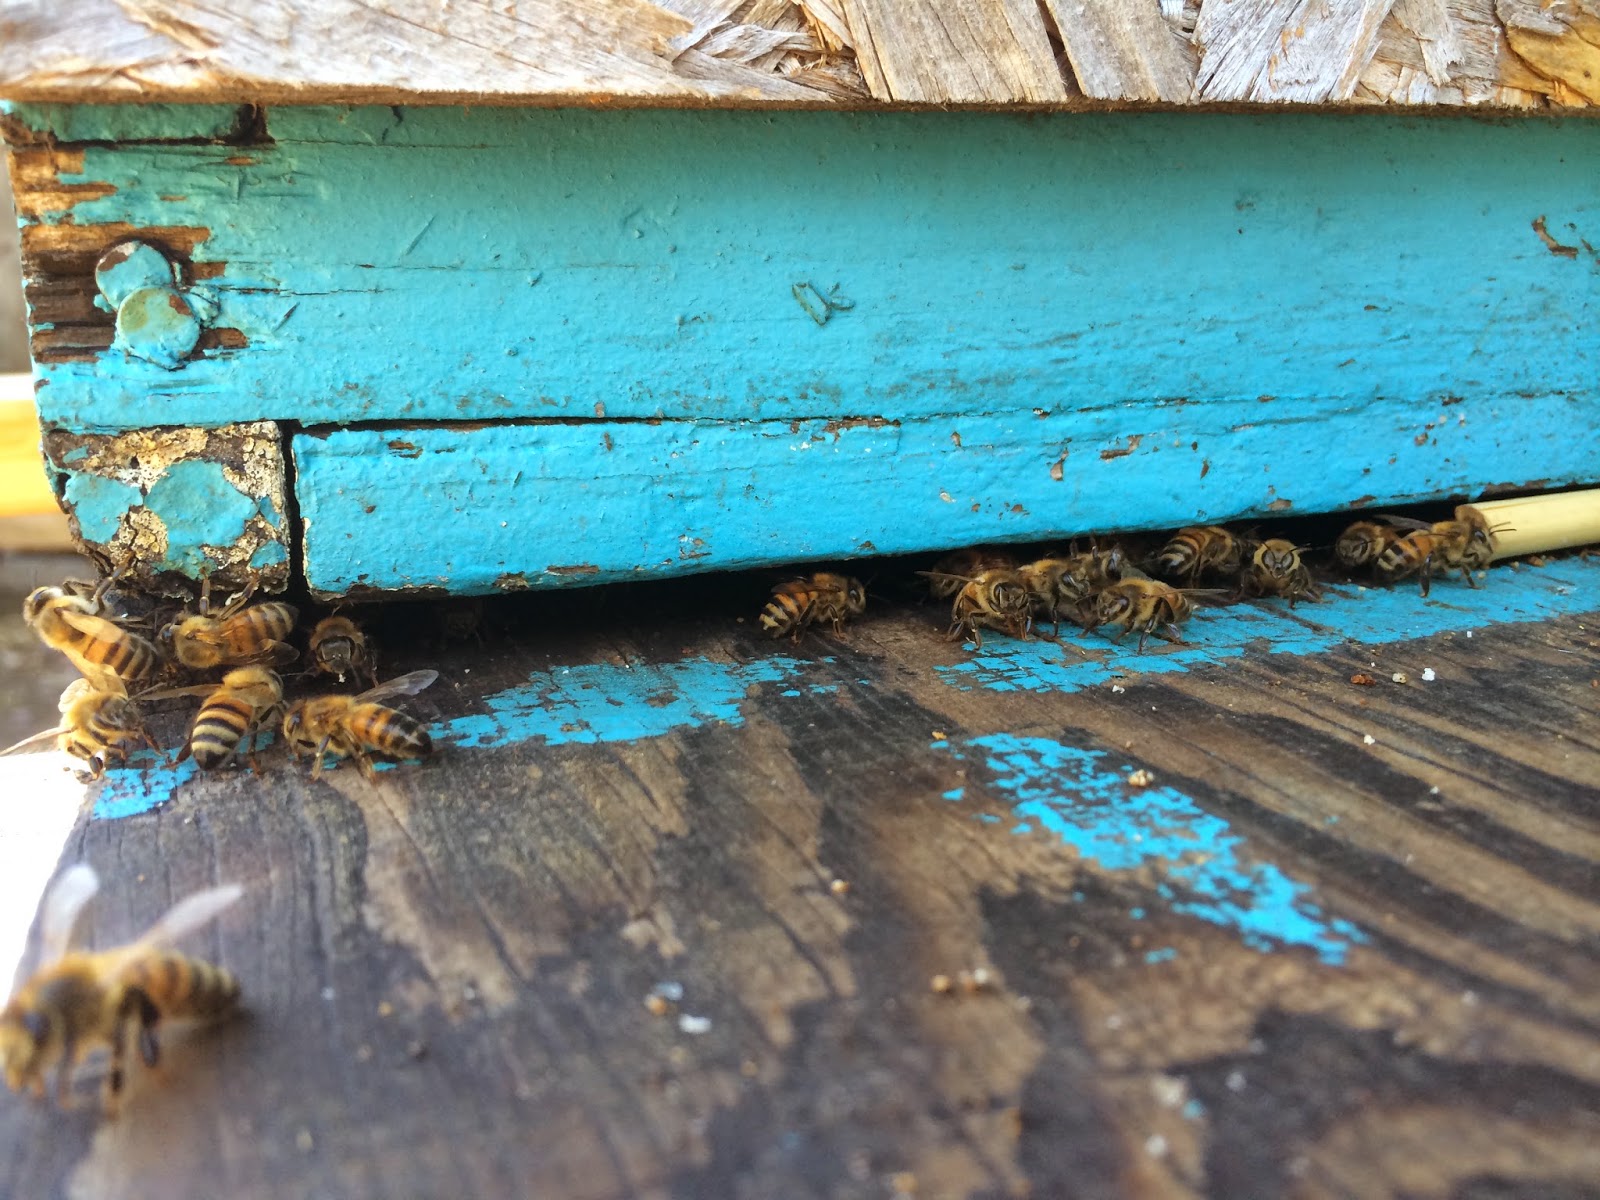 Bees in a Queenless Hive